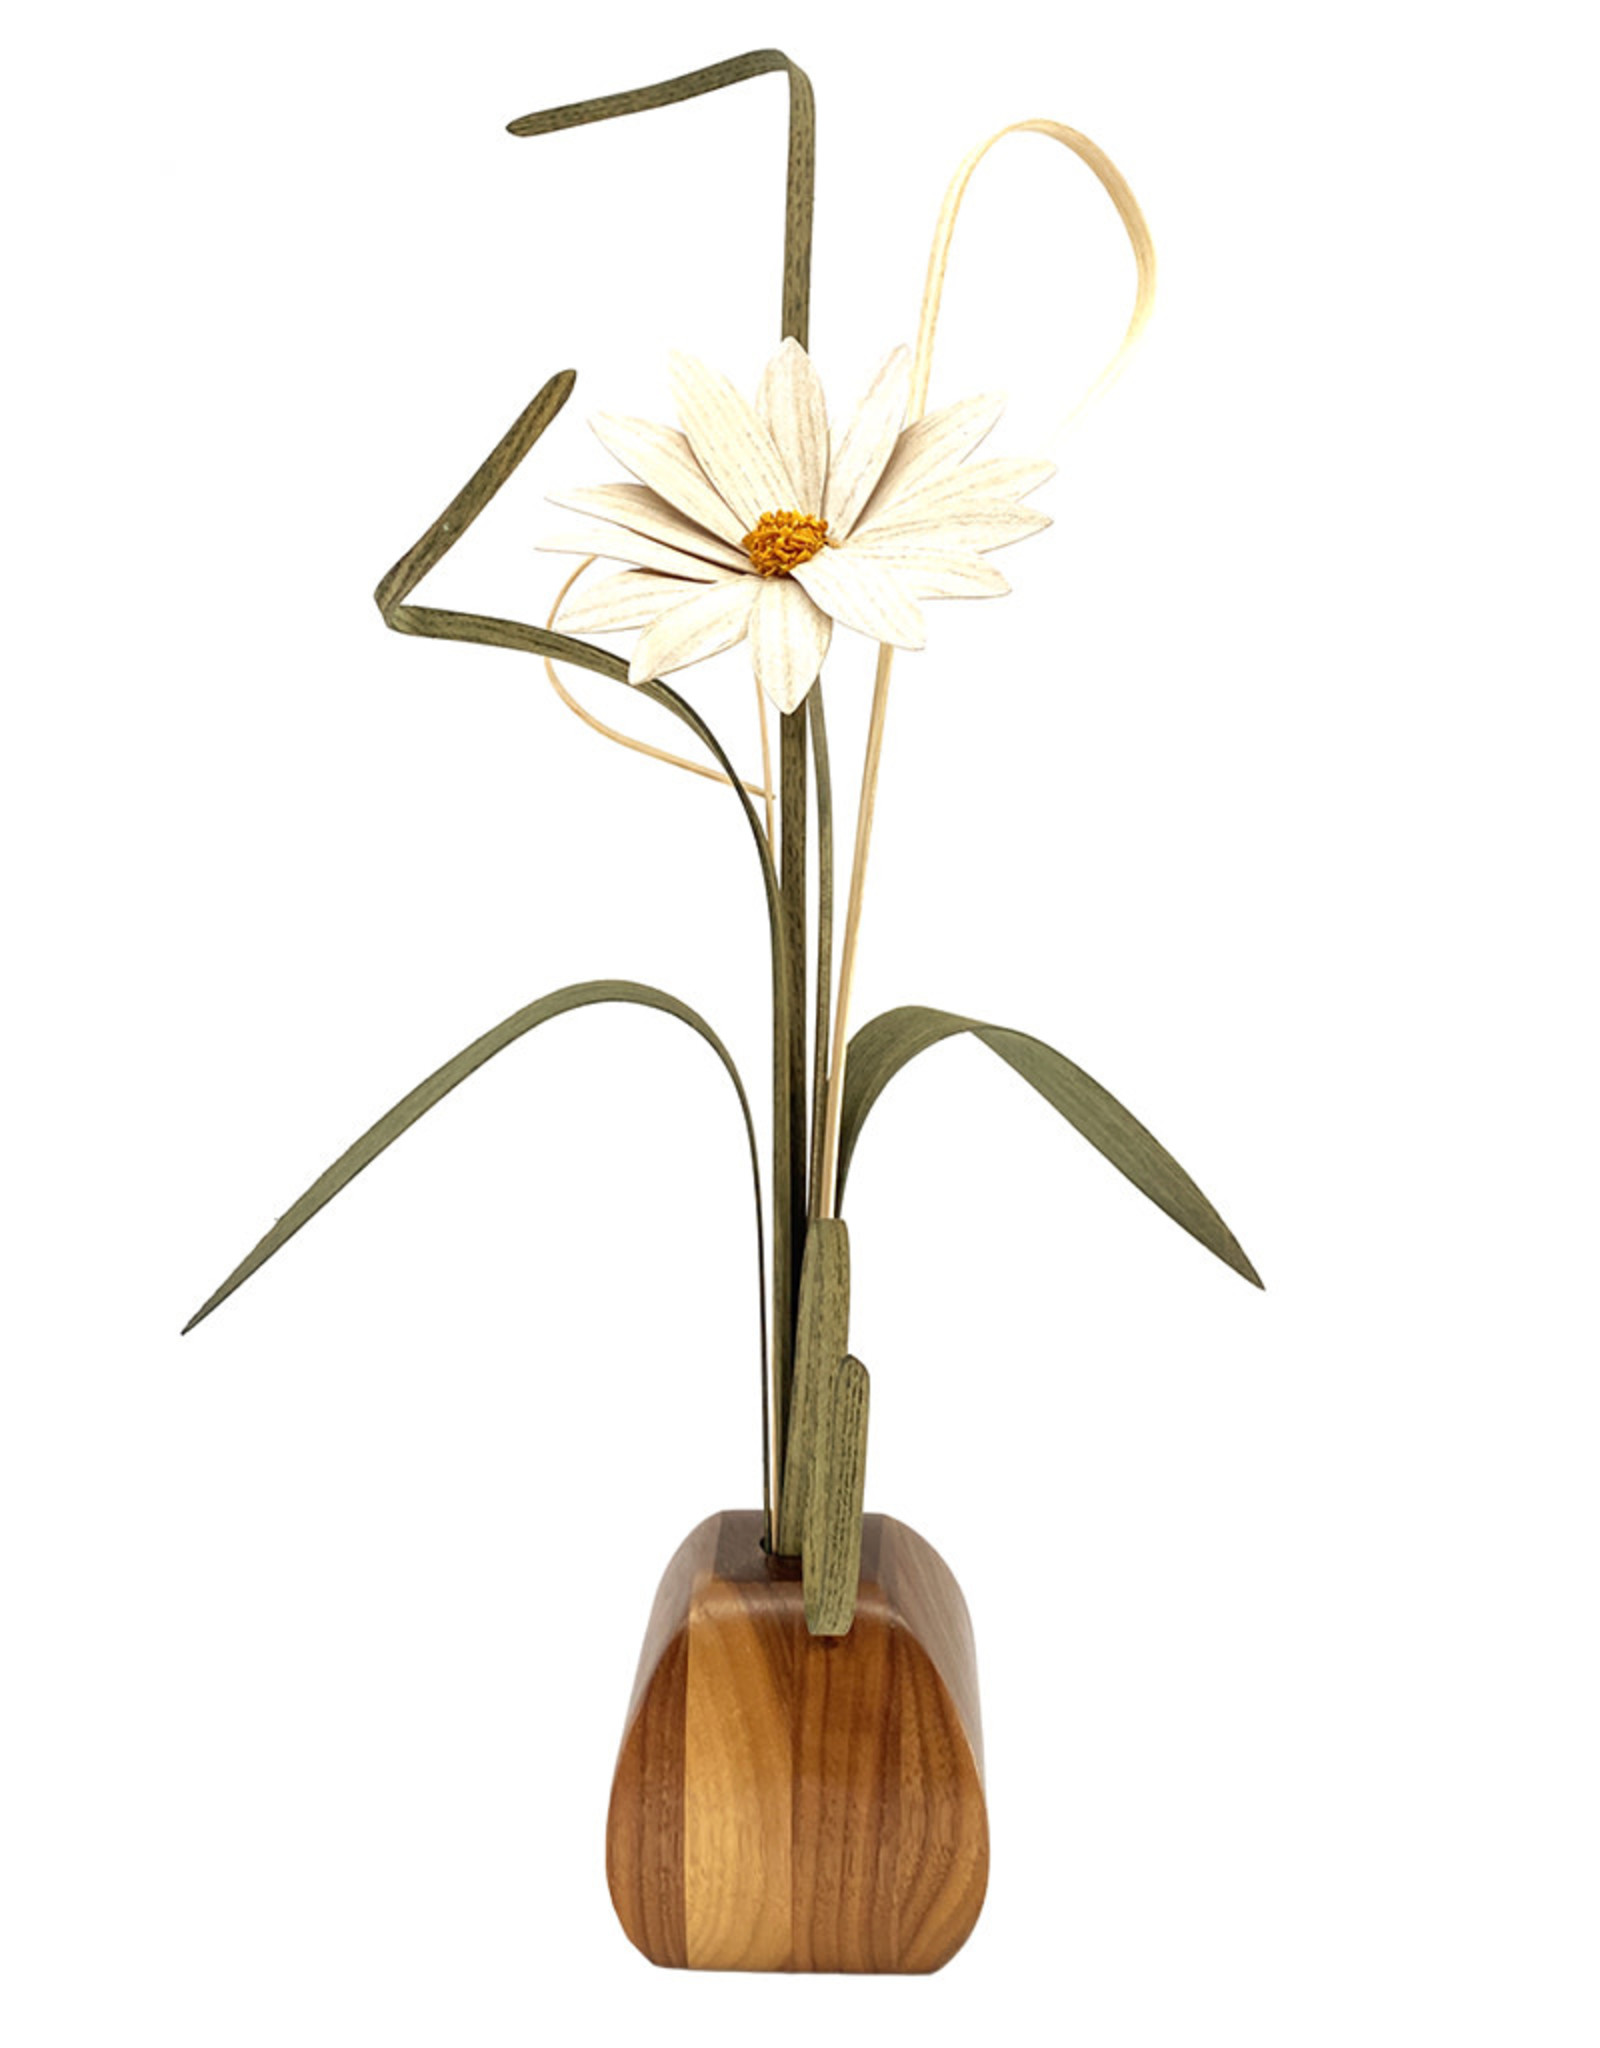 WOOD WILDFLOWERS EXPRESSIONS WOOD FLOWER ARRANGEMENT WITH 1 DAISY